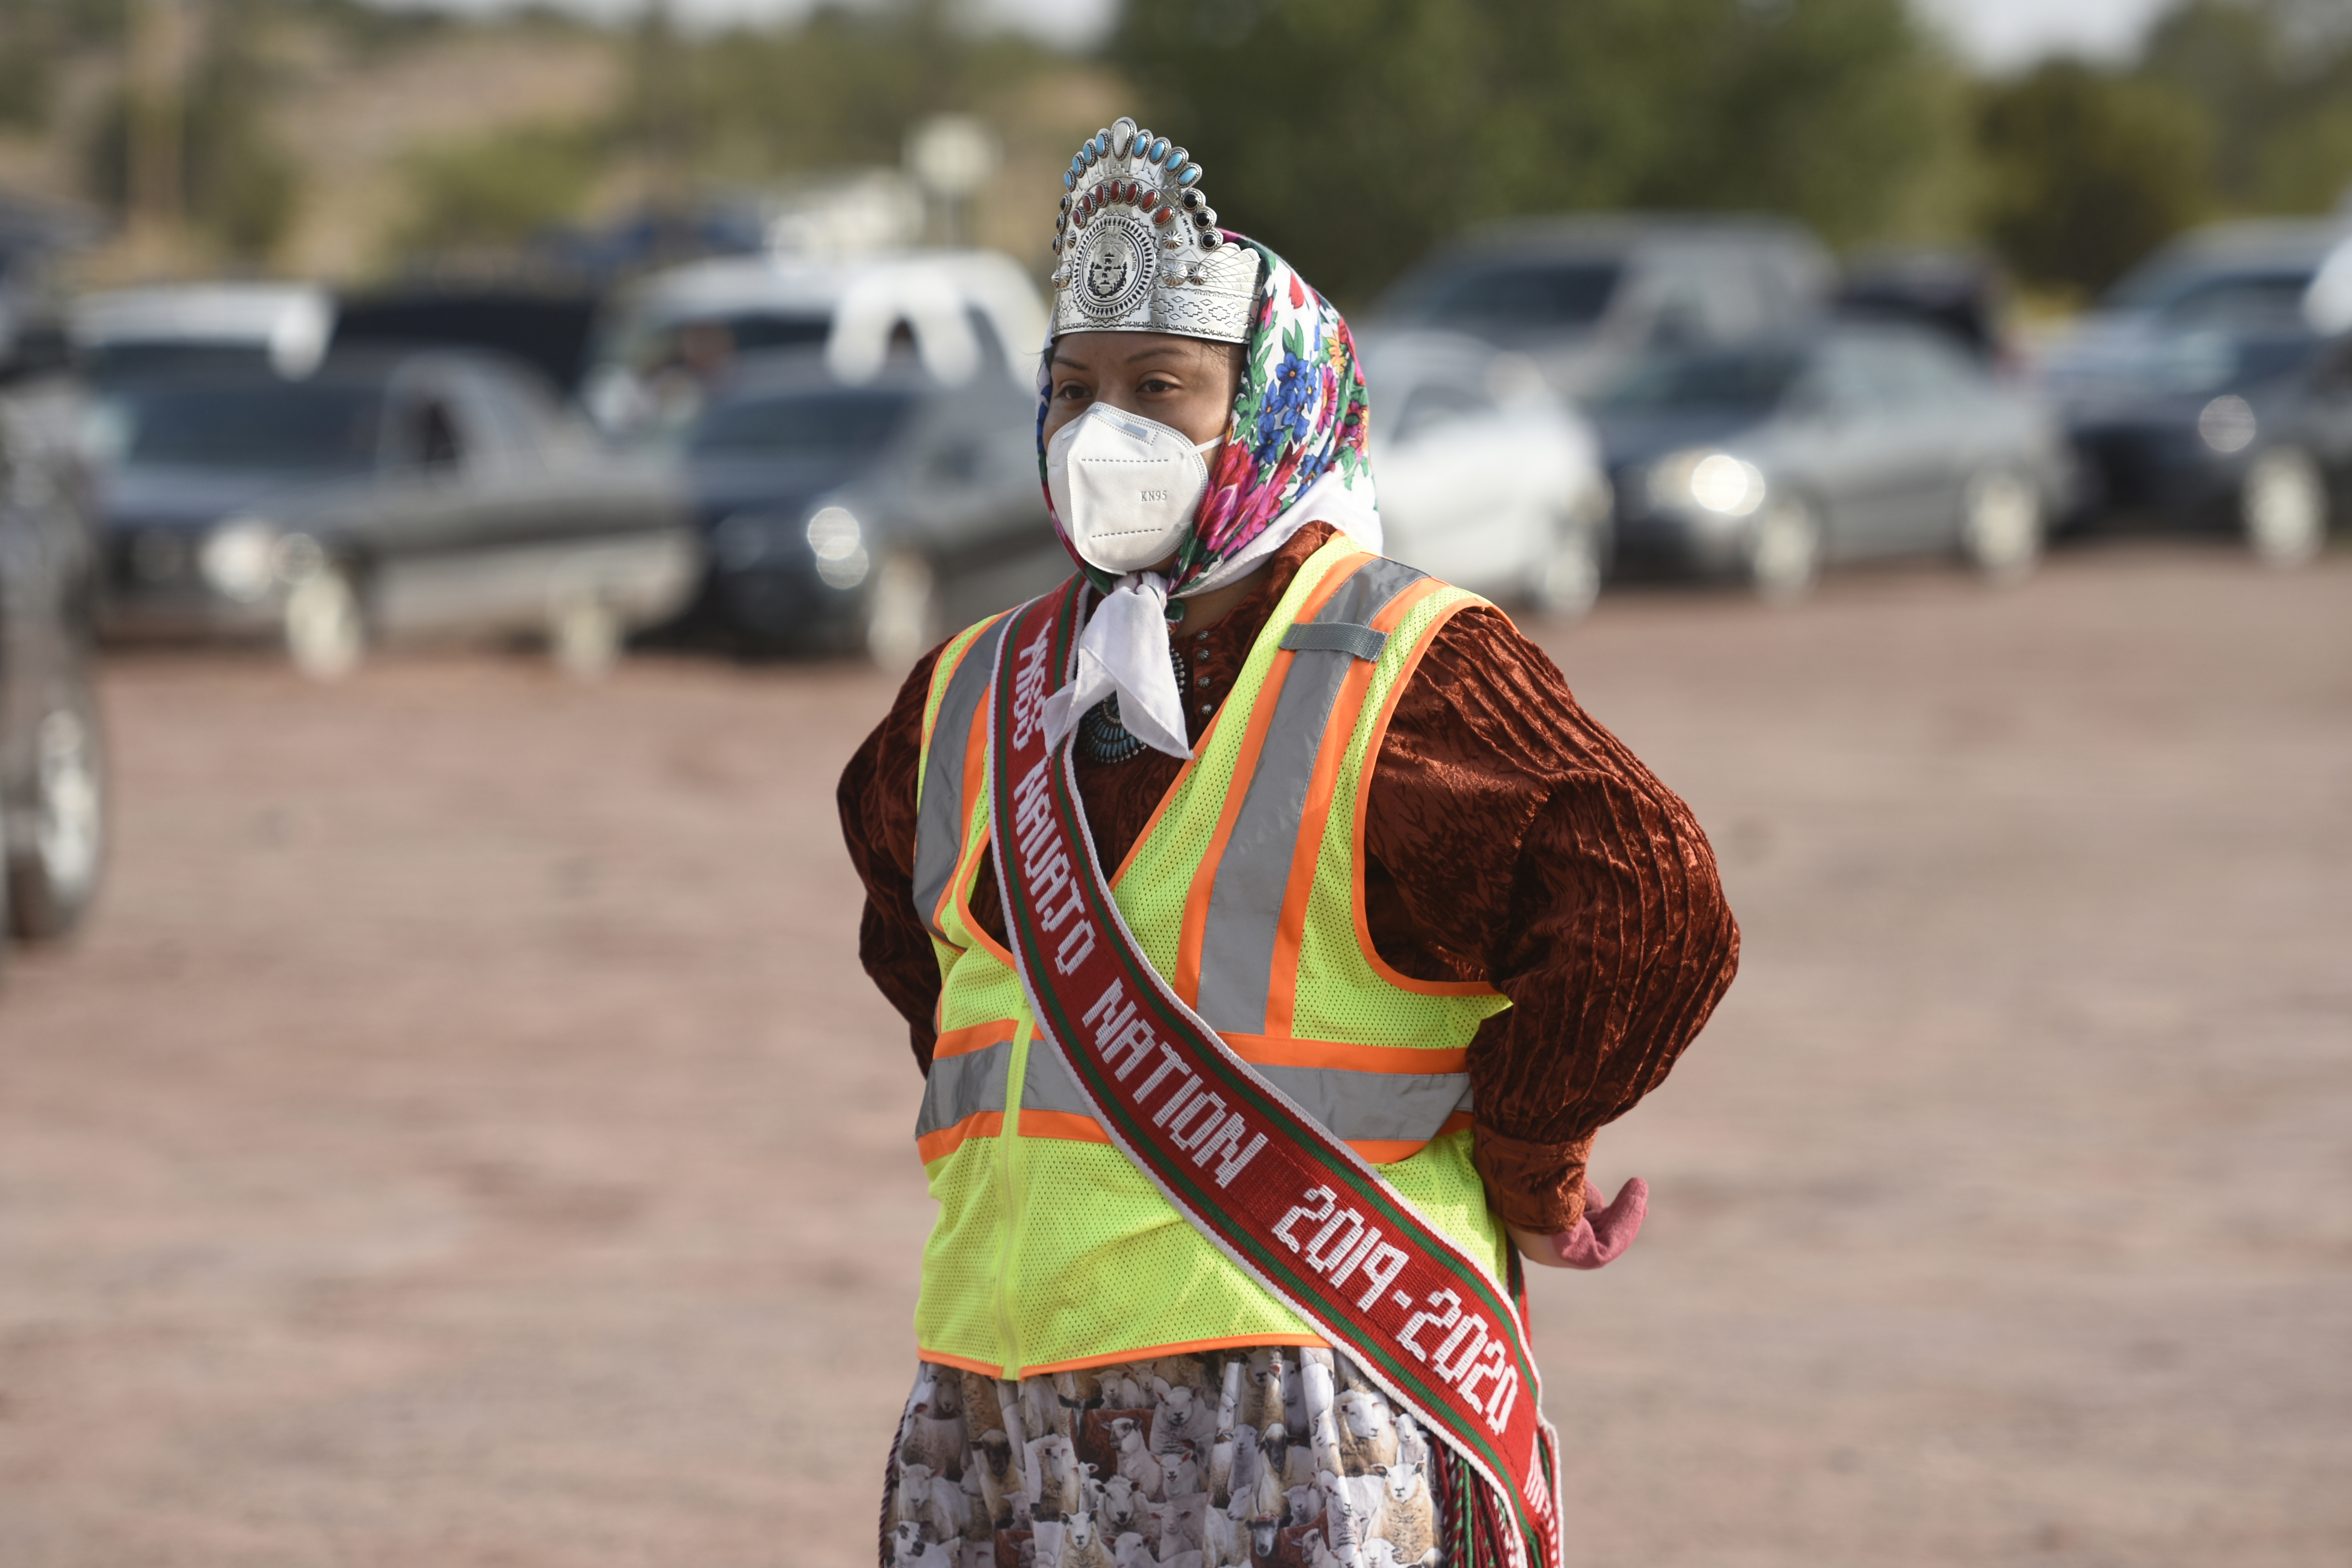 Woman wearing safety gear, headdress, and sash stands in a dirt field with cars in background.